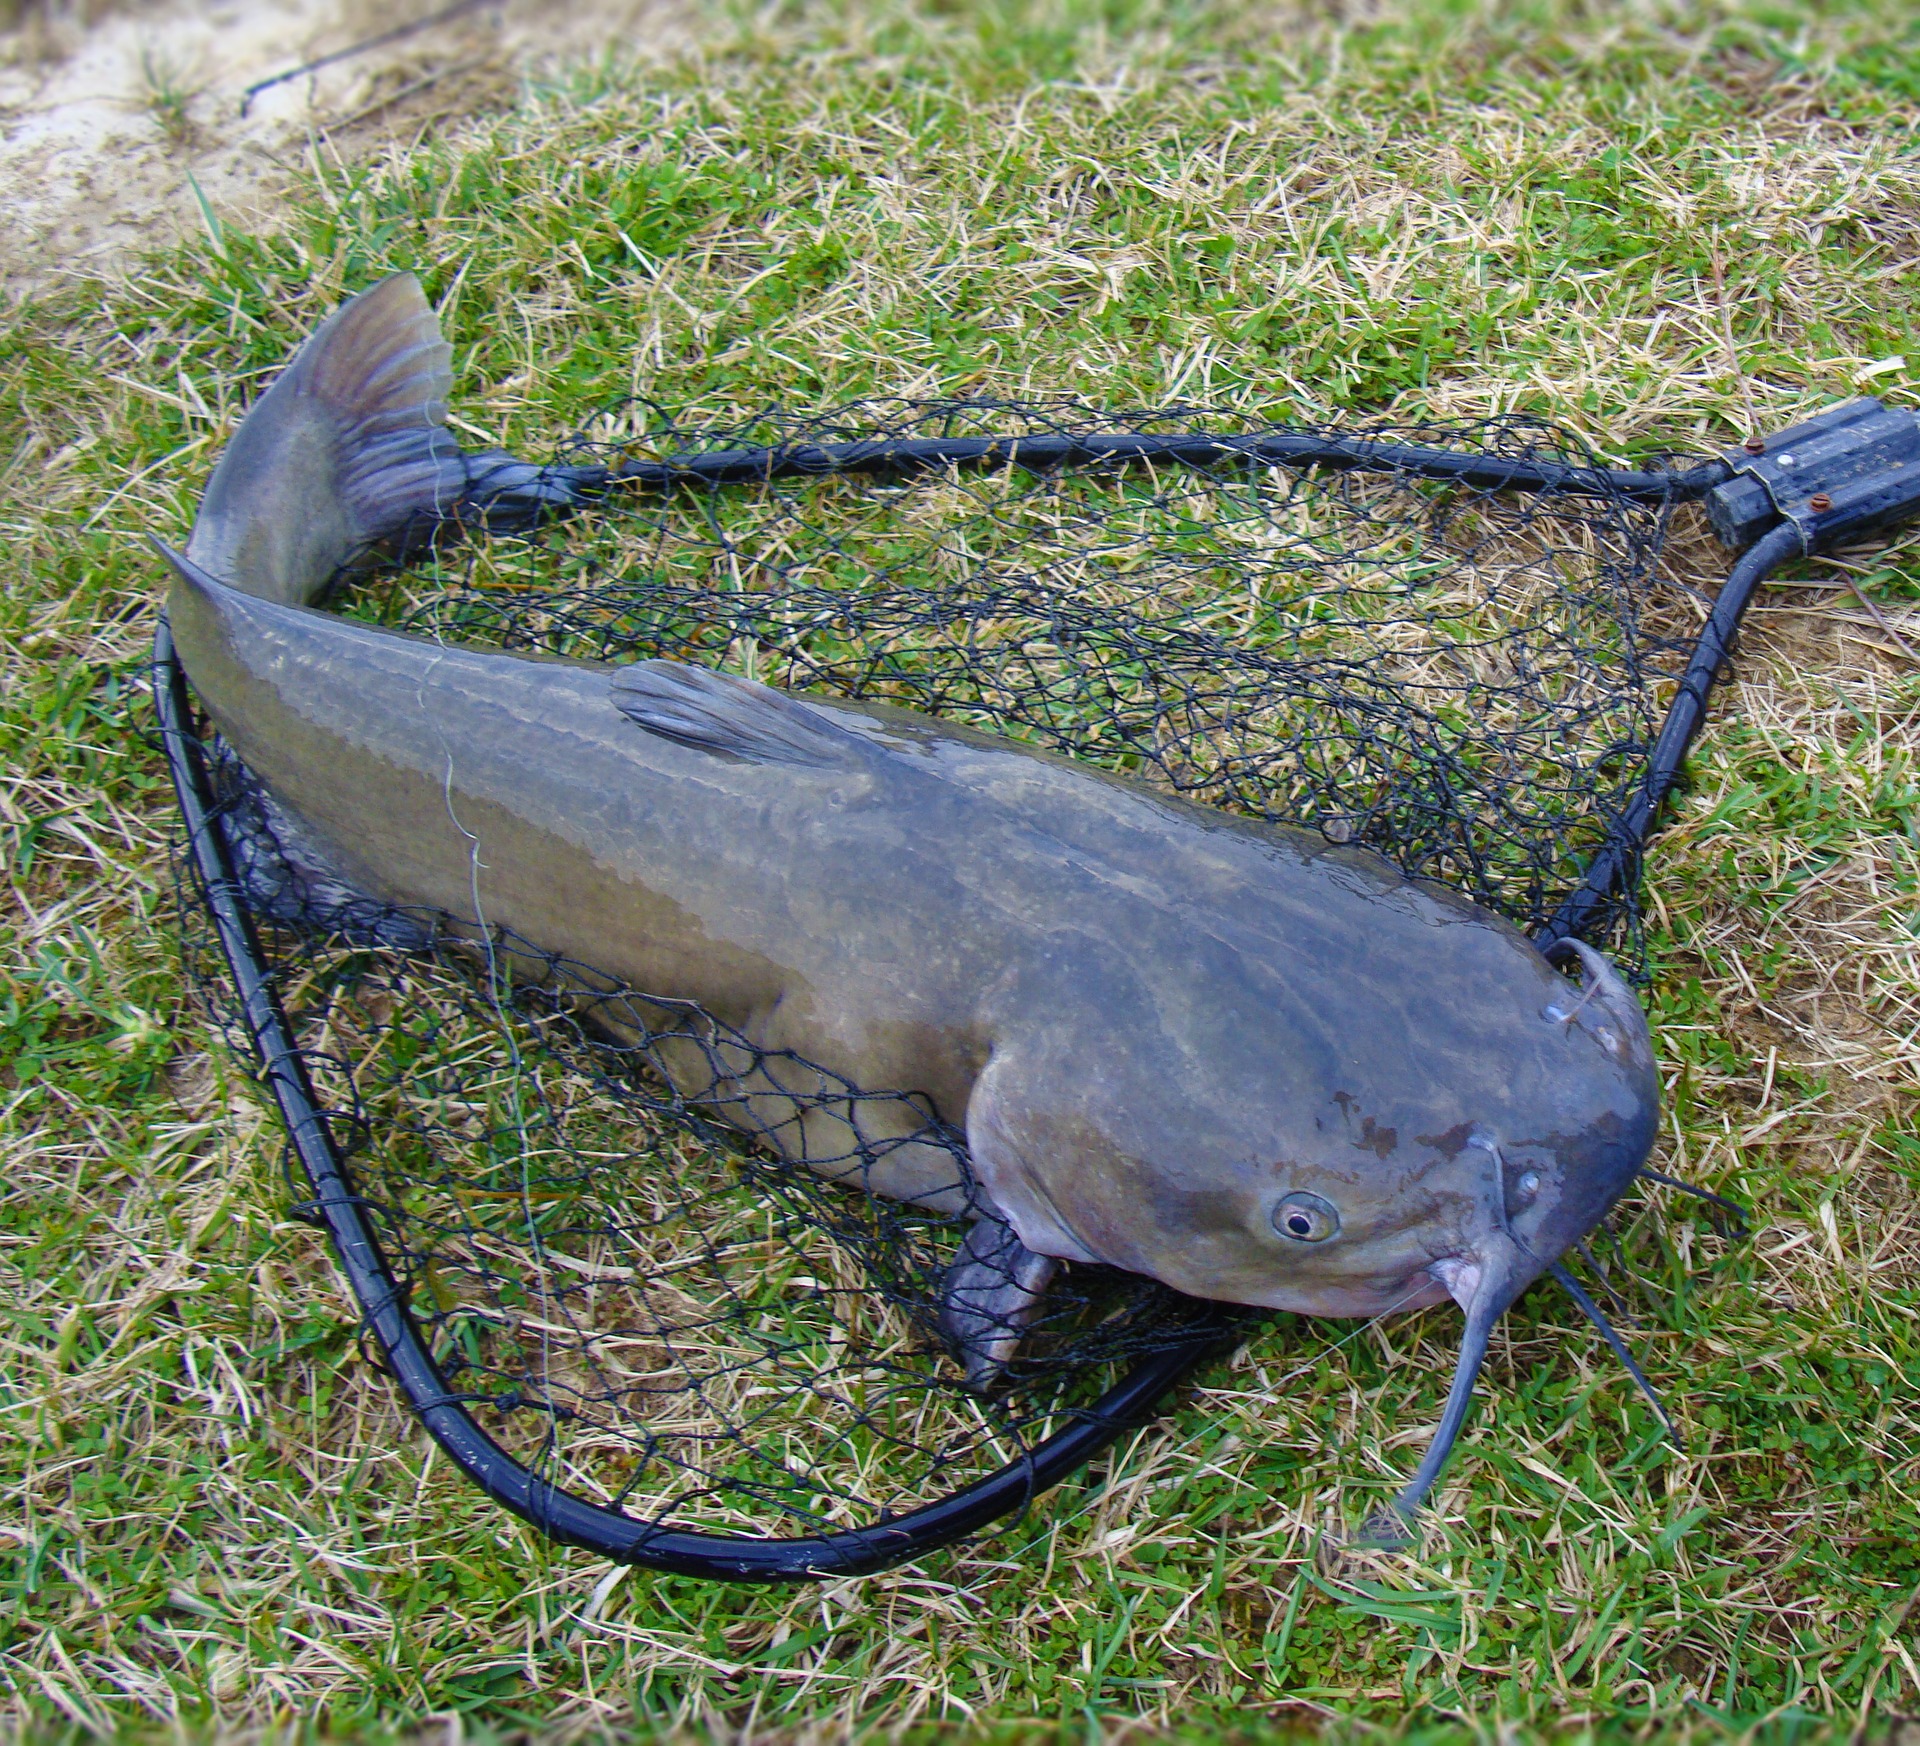 Two San Antonio lakes will be regularly stocked with catfish this